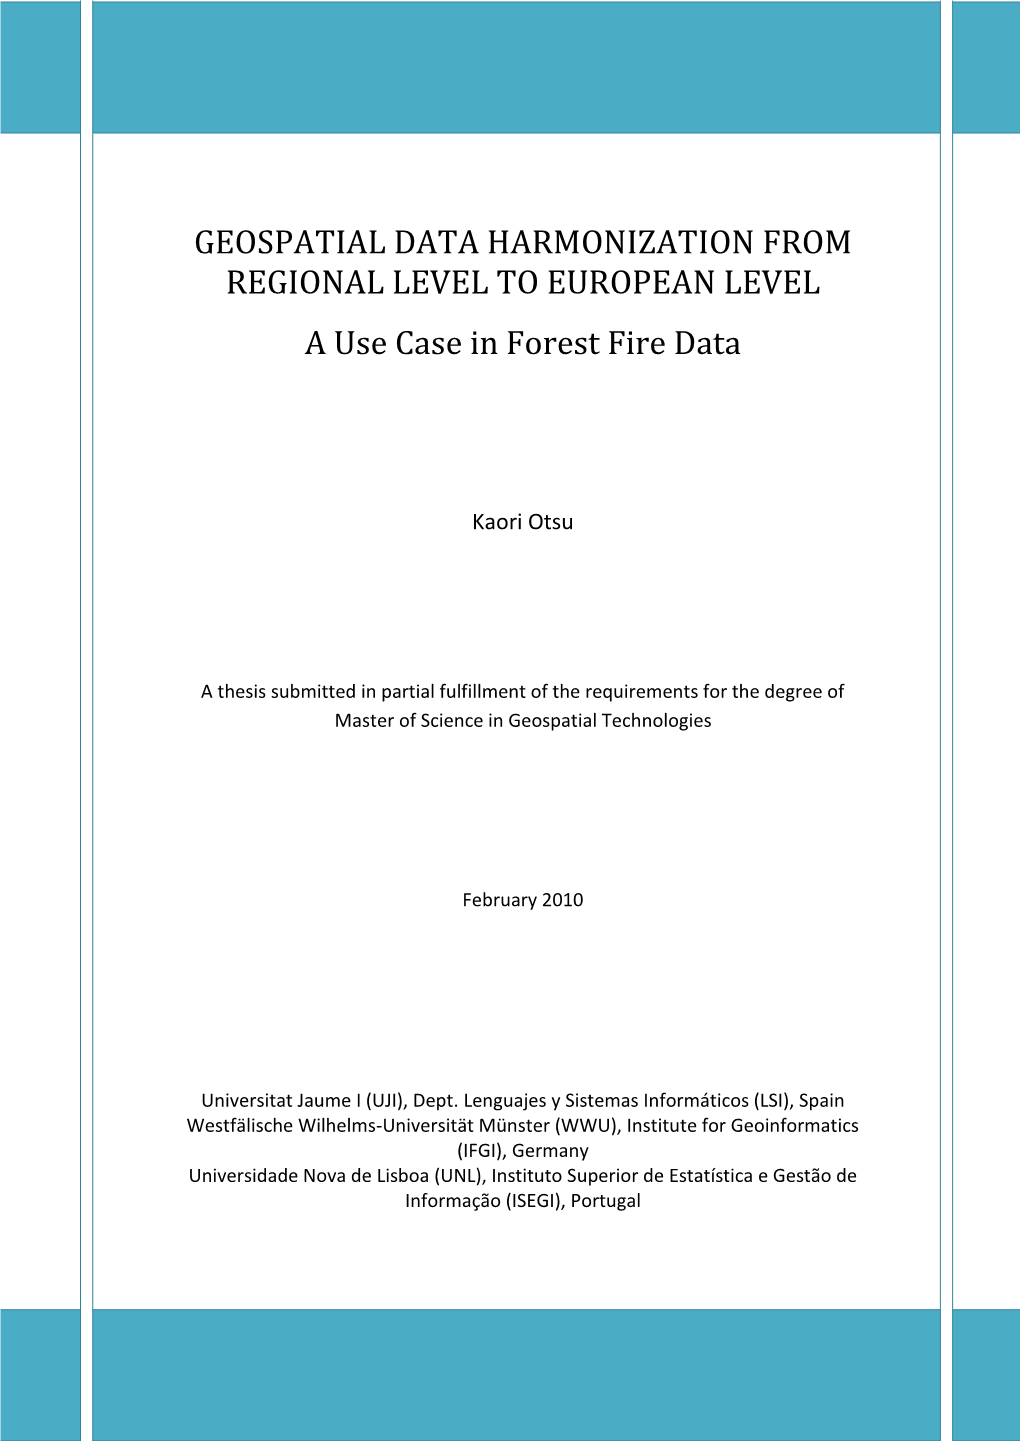 GEOSPATIAL DATA HARMONIZATION from REGIONAL LEVEL to EUROPEAN LEVEL a Use Case in Forest Fire Data